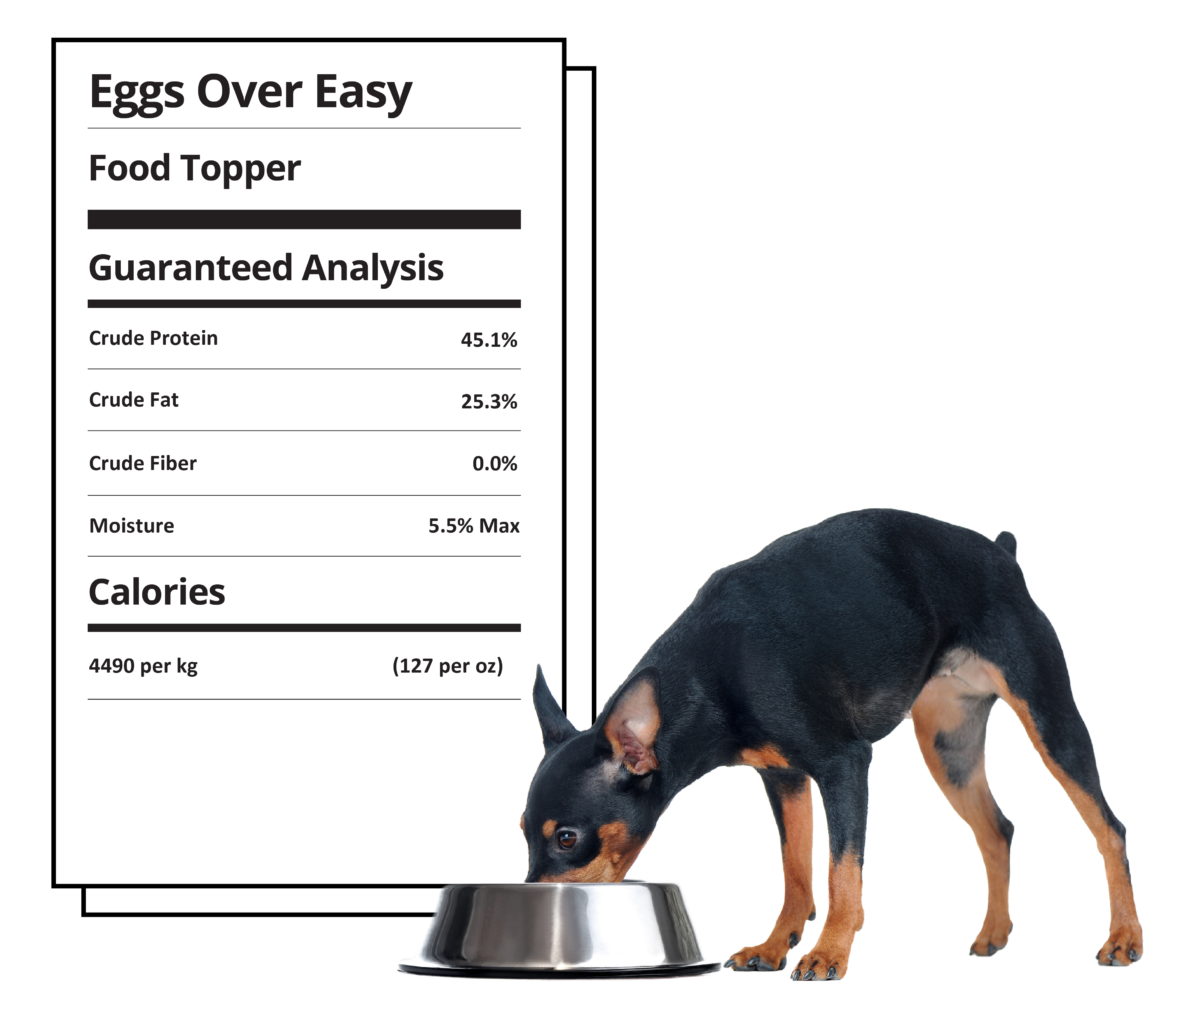 Eggs Over Easy nutrition label